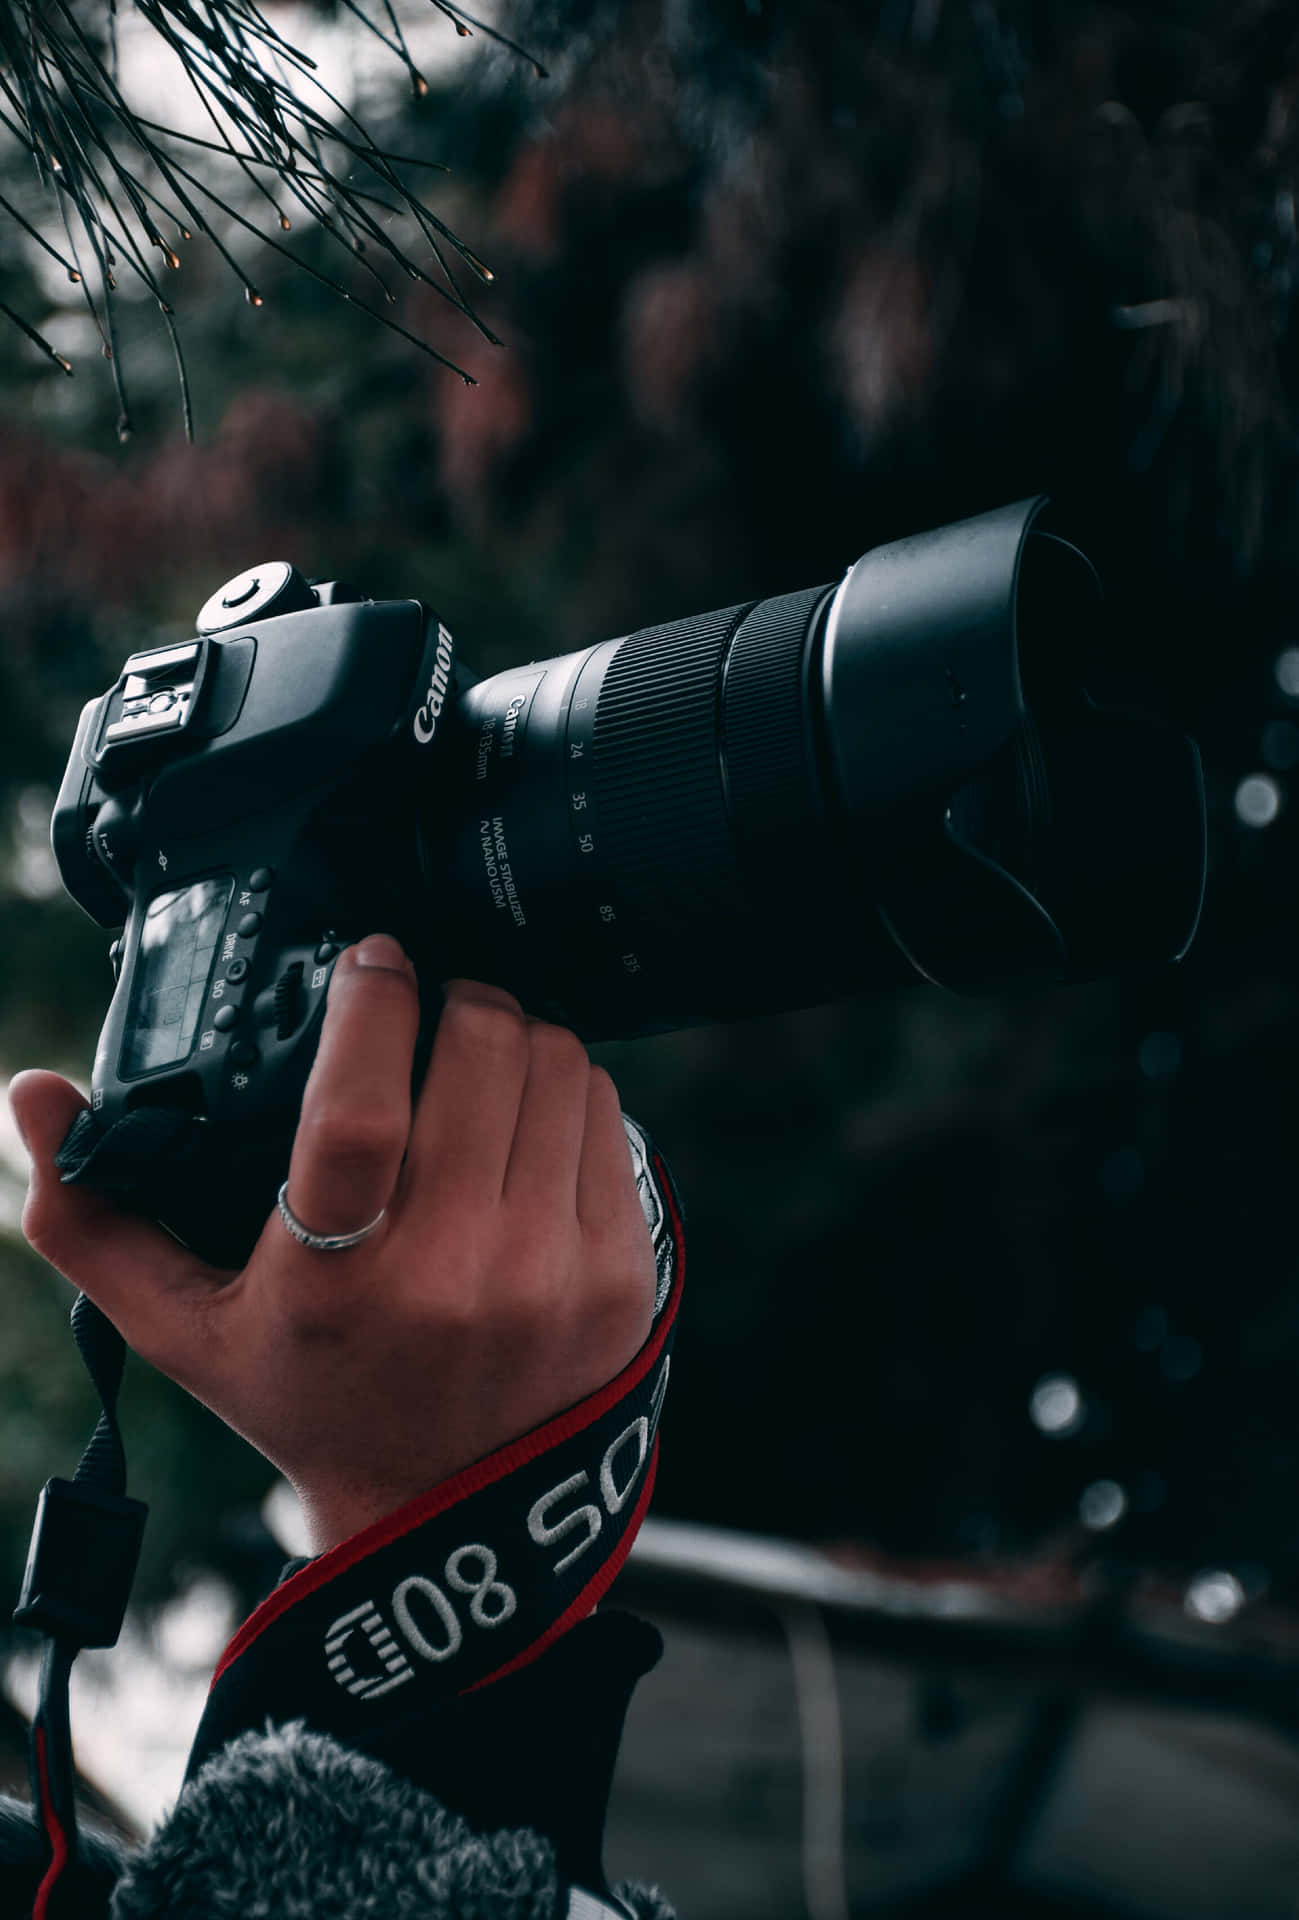 Capture Every Moment With a Professional-Grade DSLR Camera